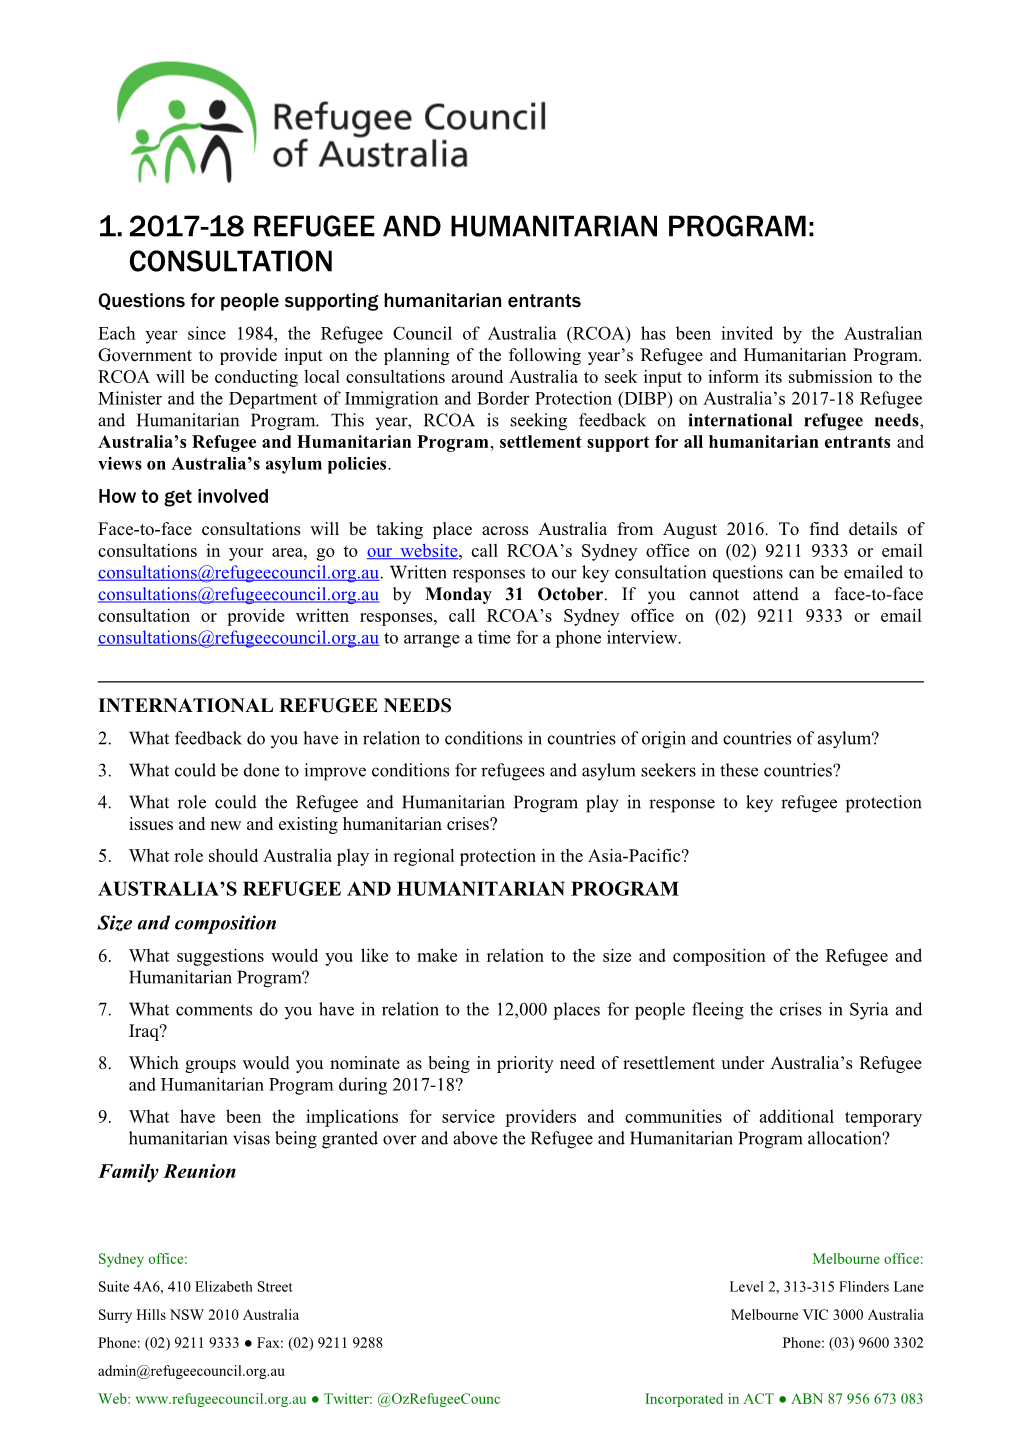 2017-2018 Refugee and Humanitarian Consultation Questions for Service Providers